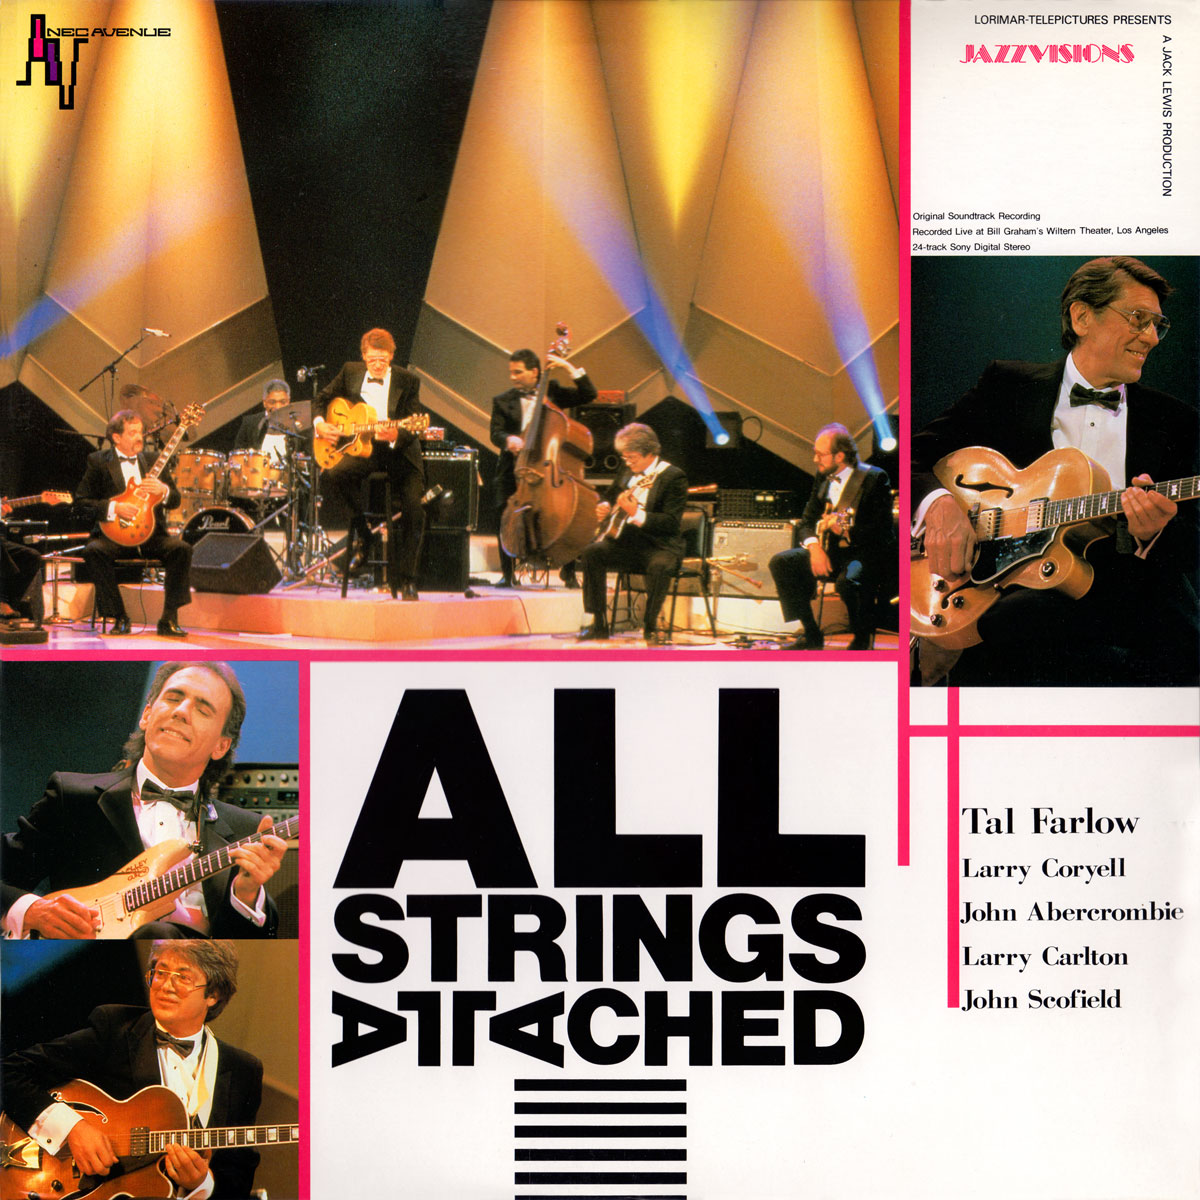 Tal Farlow, Larry Coryell, John Abercrombie, Larry Carlton, John Scofield - All Strings Attached (1987) - Front cover